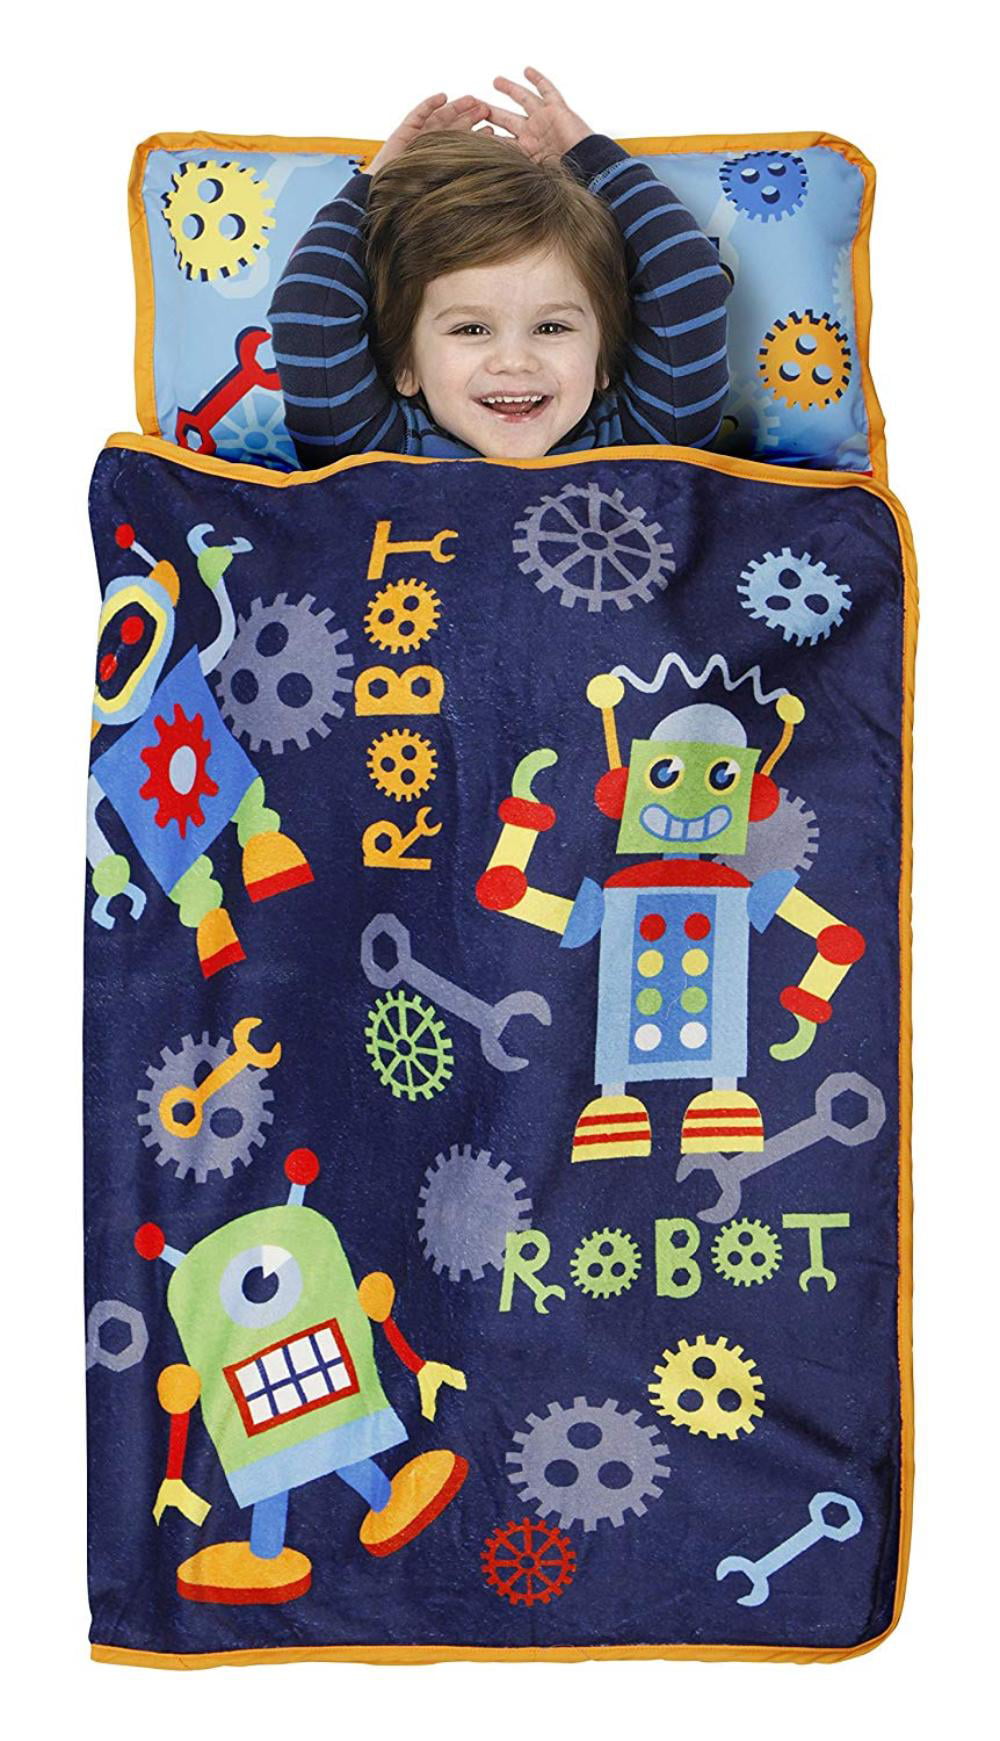 Includes Pillow & Fleece Blanket Great for Boys and Girls Toddler Nap Mat 